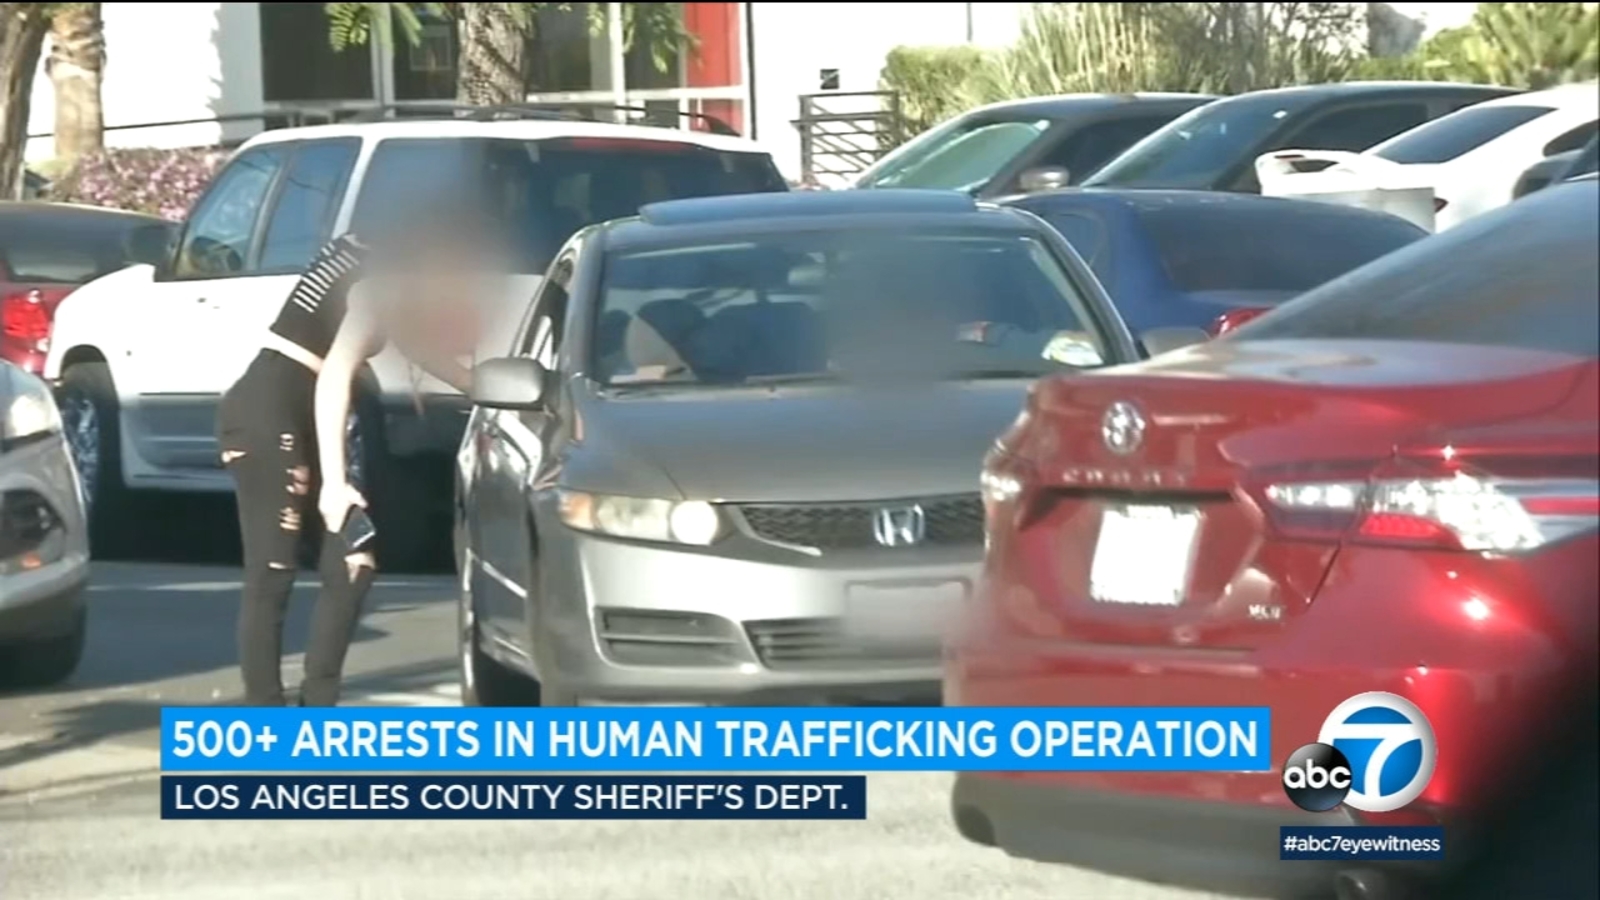 More than 500 arrested in statewide human trafficking operation - ABC7 Los Angeles